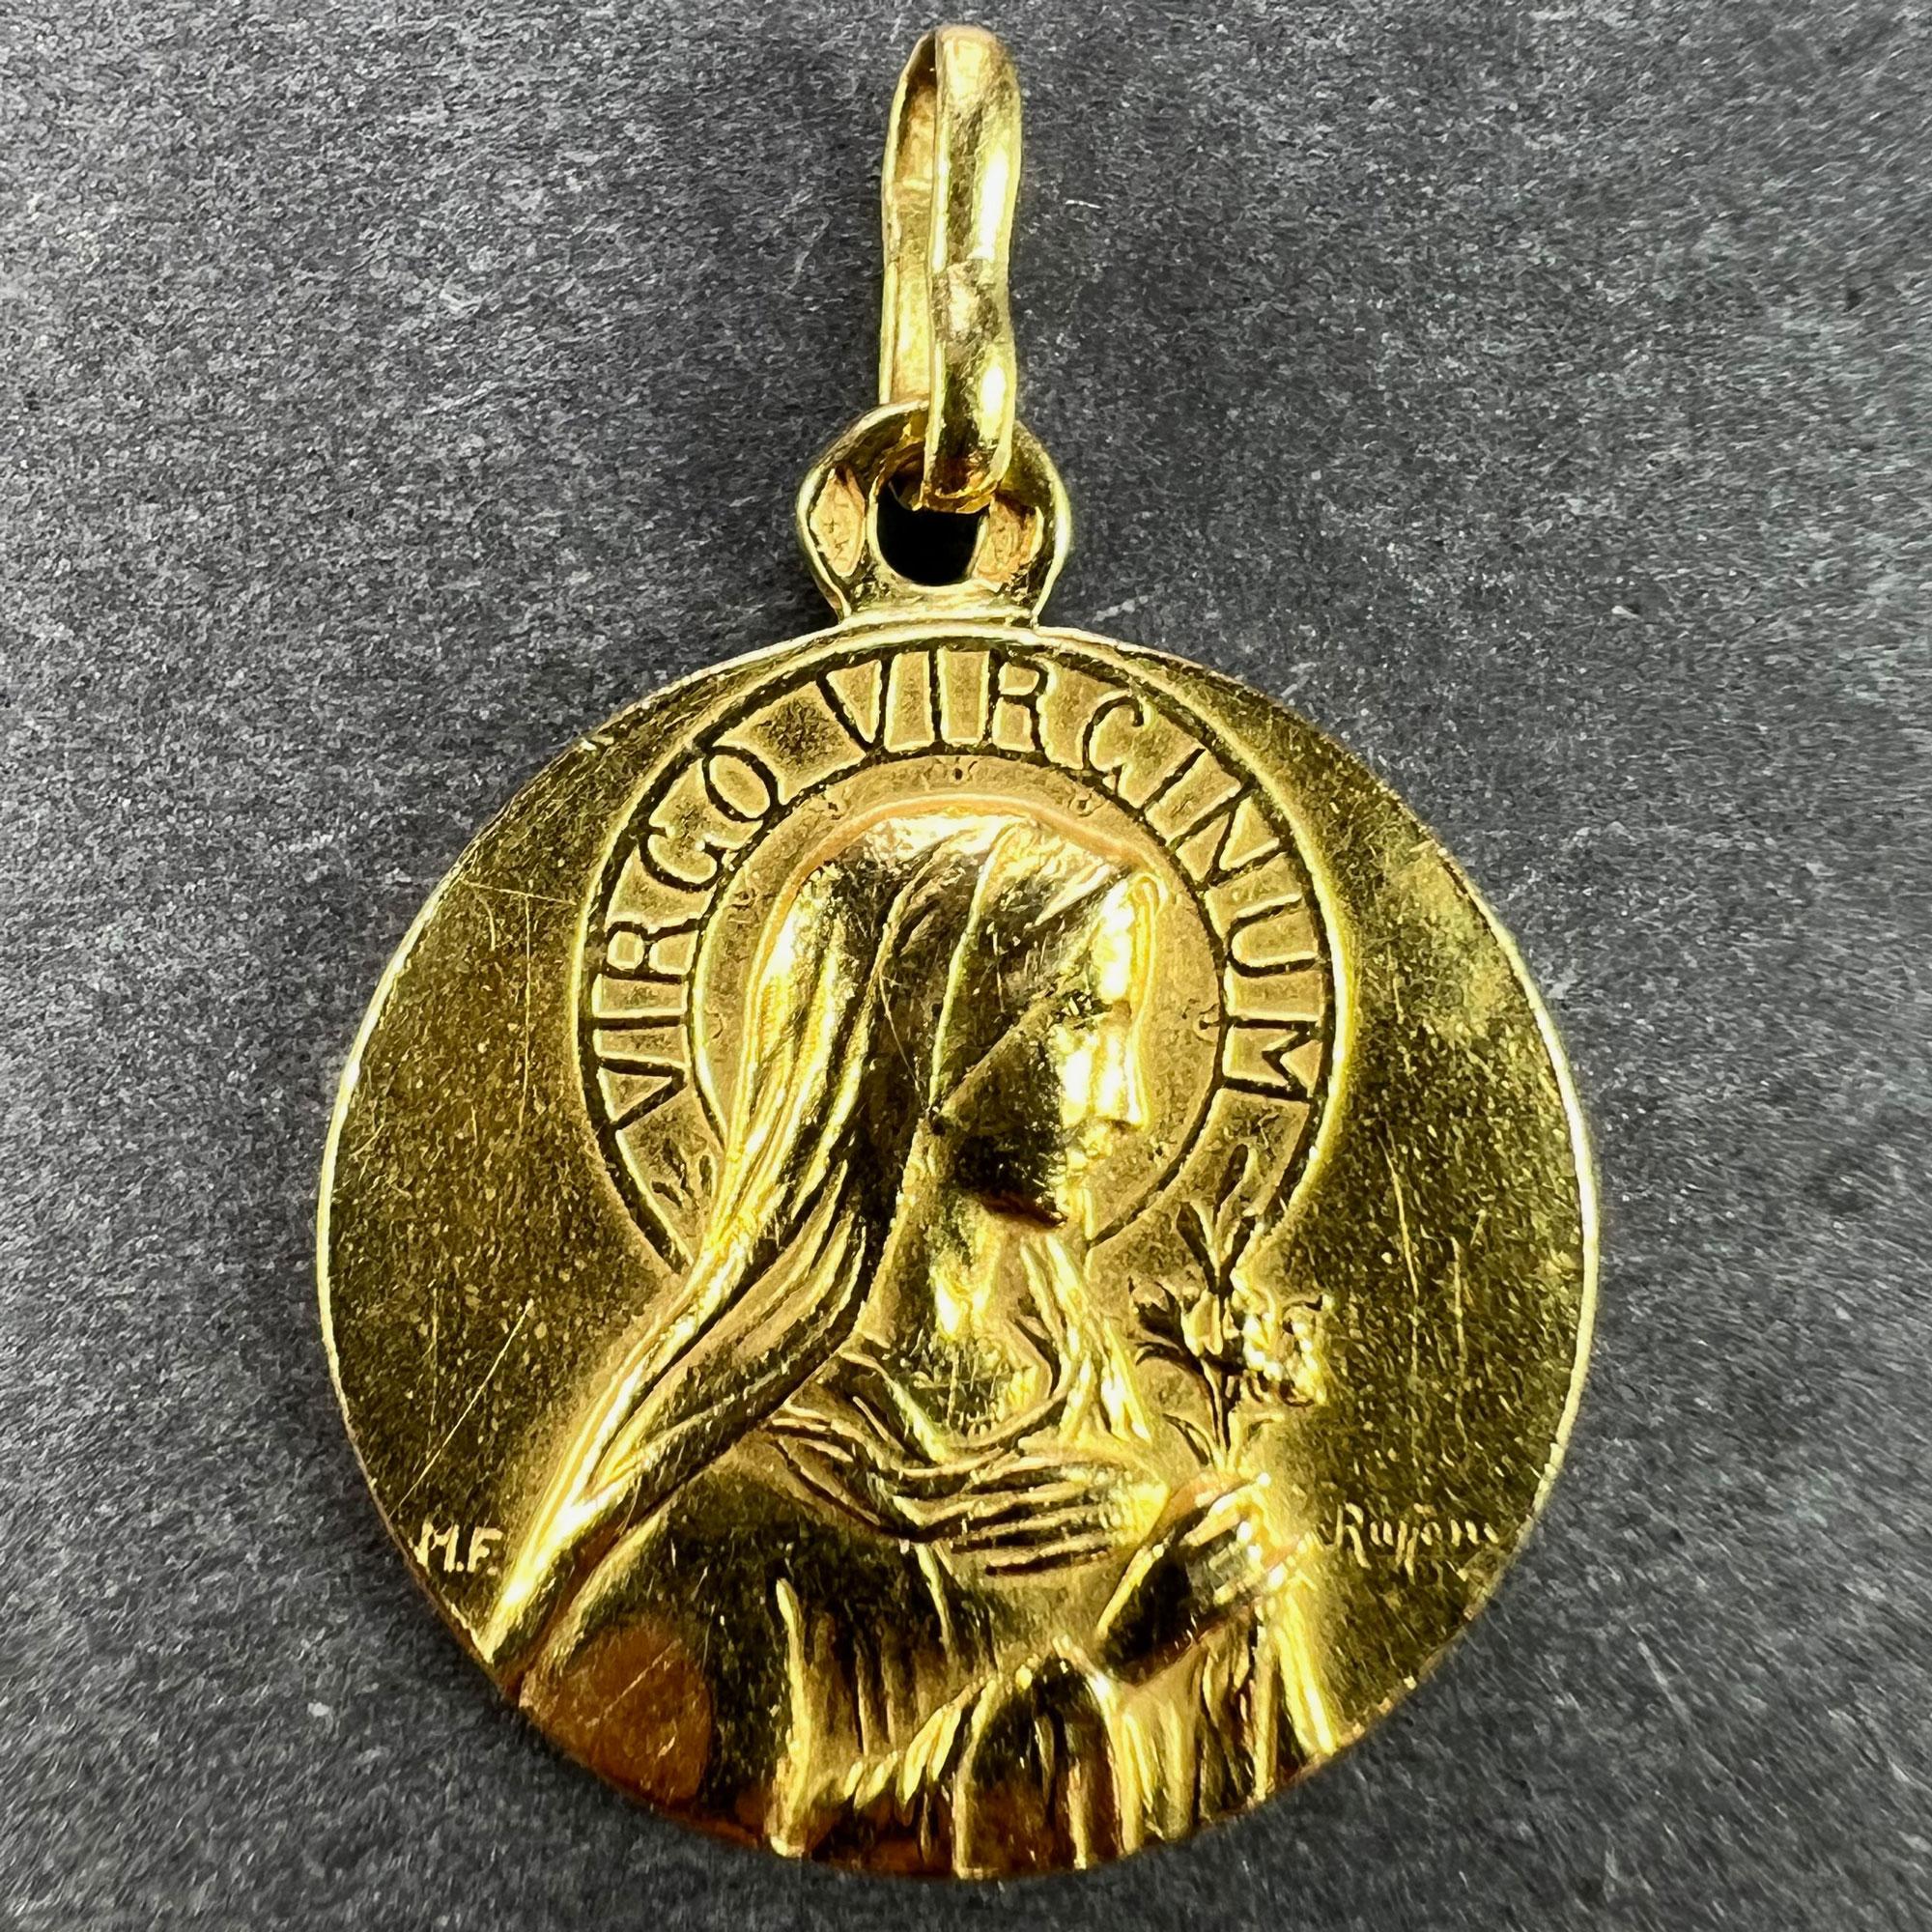 A French 18 karat (18K) yellow gold charm pendant designed as a round medal with a relief of the Virgin Mary in profile with a halo of the Latin motto 'VIRGO VIRGINUM' (Virgin of Virgins). The Virgin holds a sheaf of lilies to represent purity. The